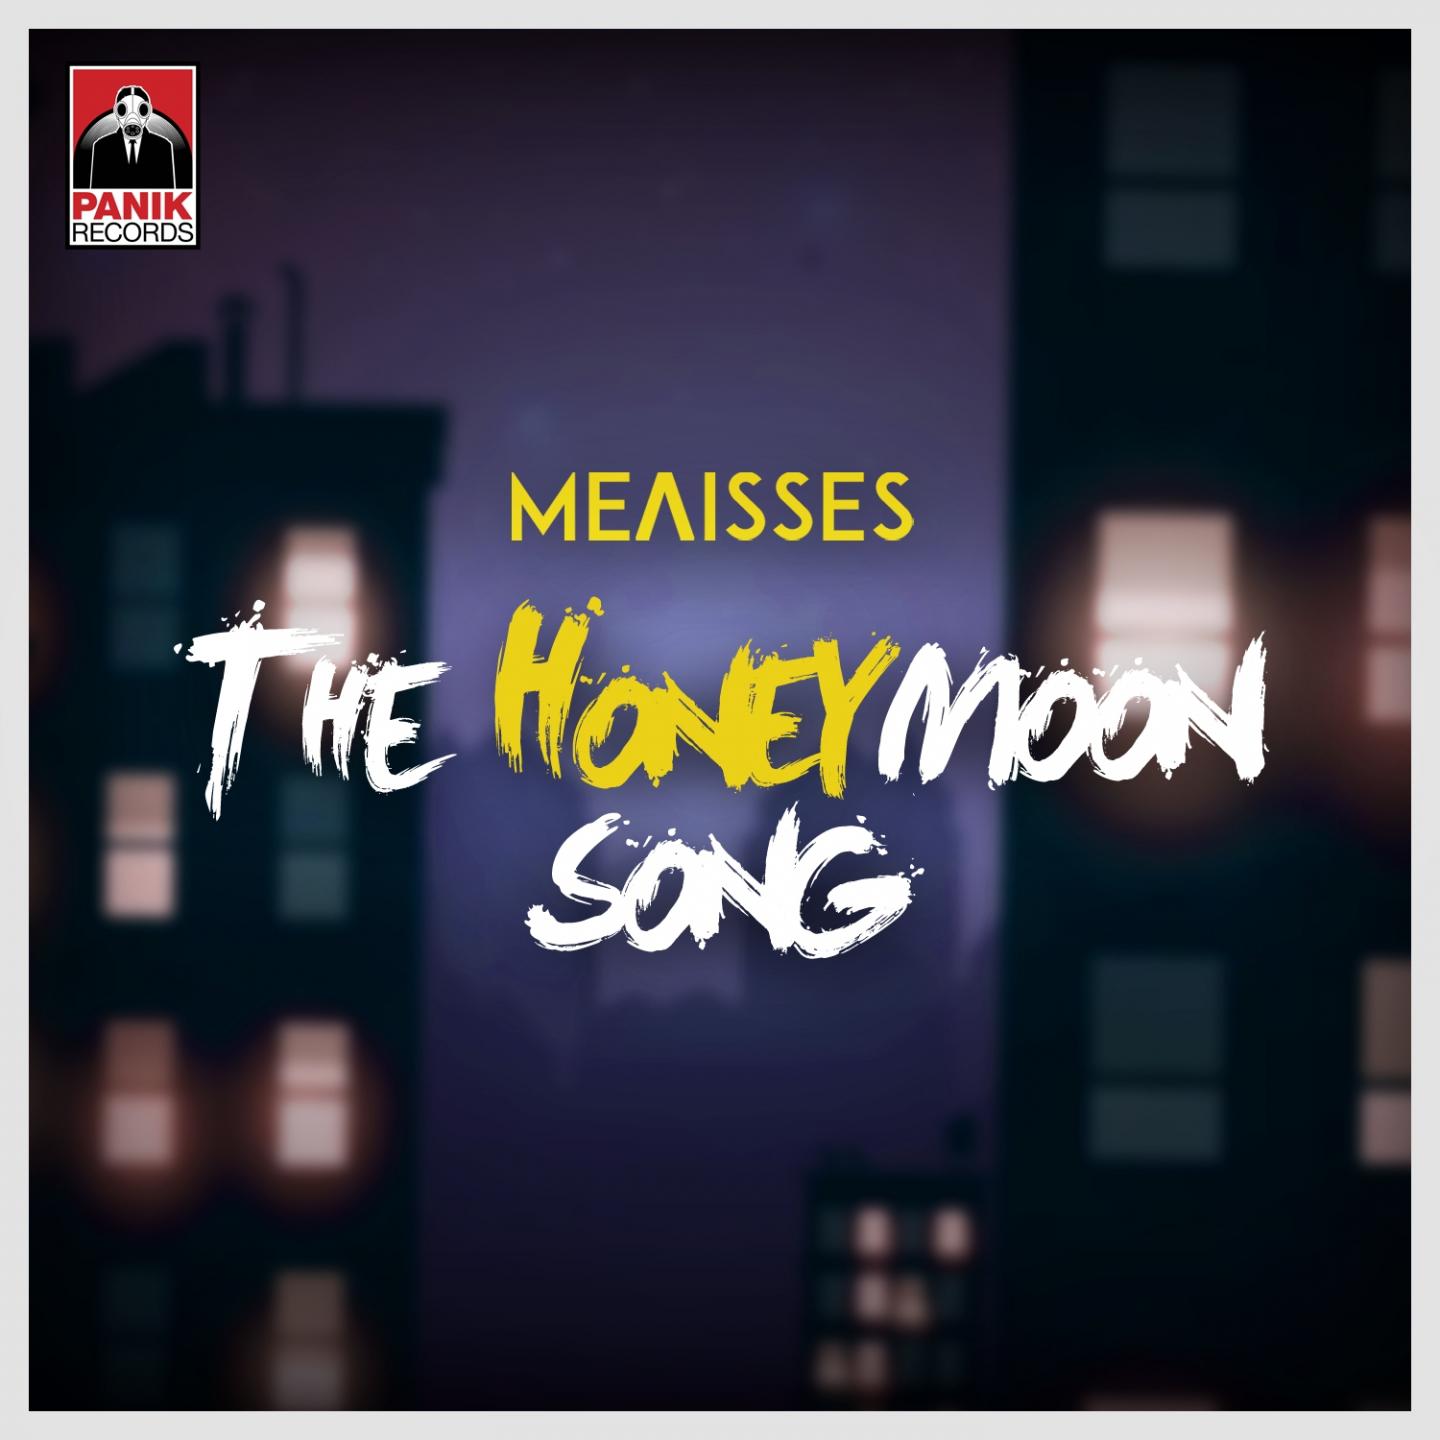 The Honeymoon Song (Melisses Remake)